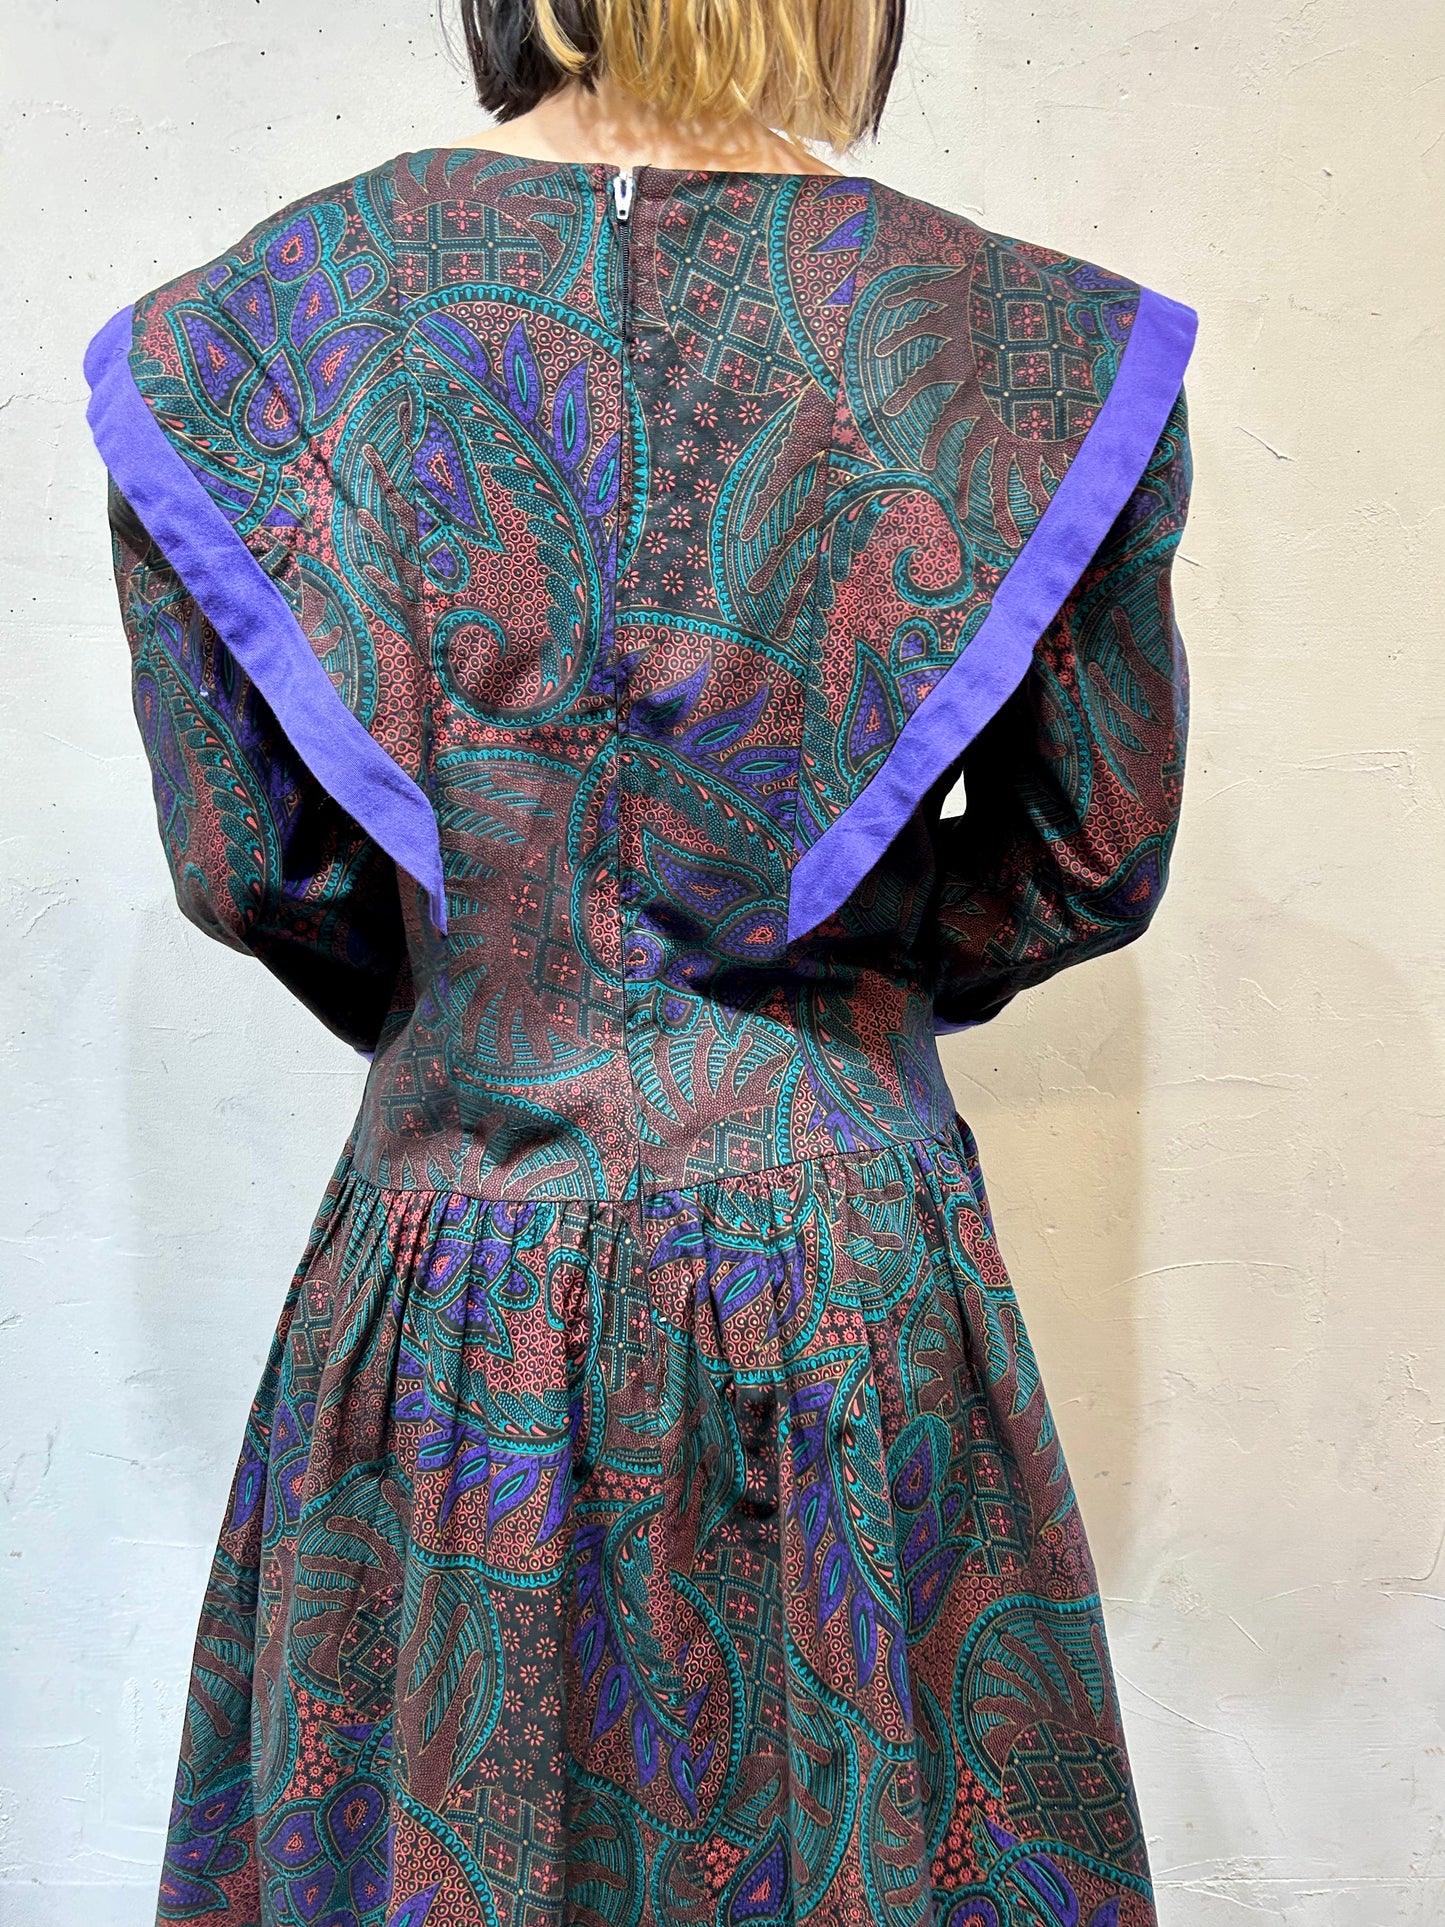 '80s Vintage Dress MADE IN USA [A25900]